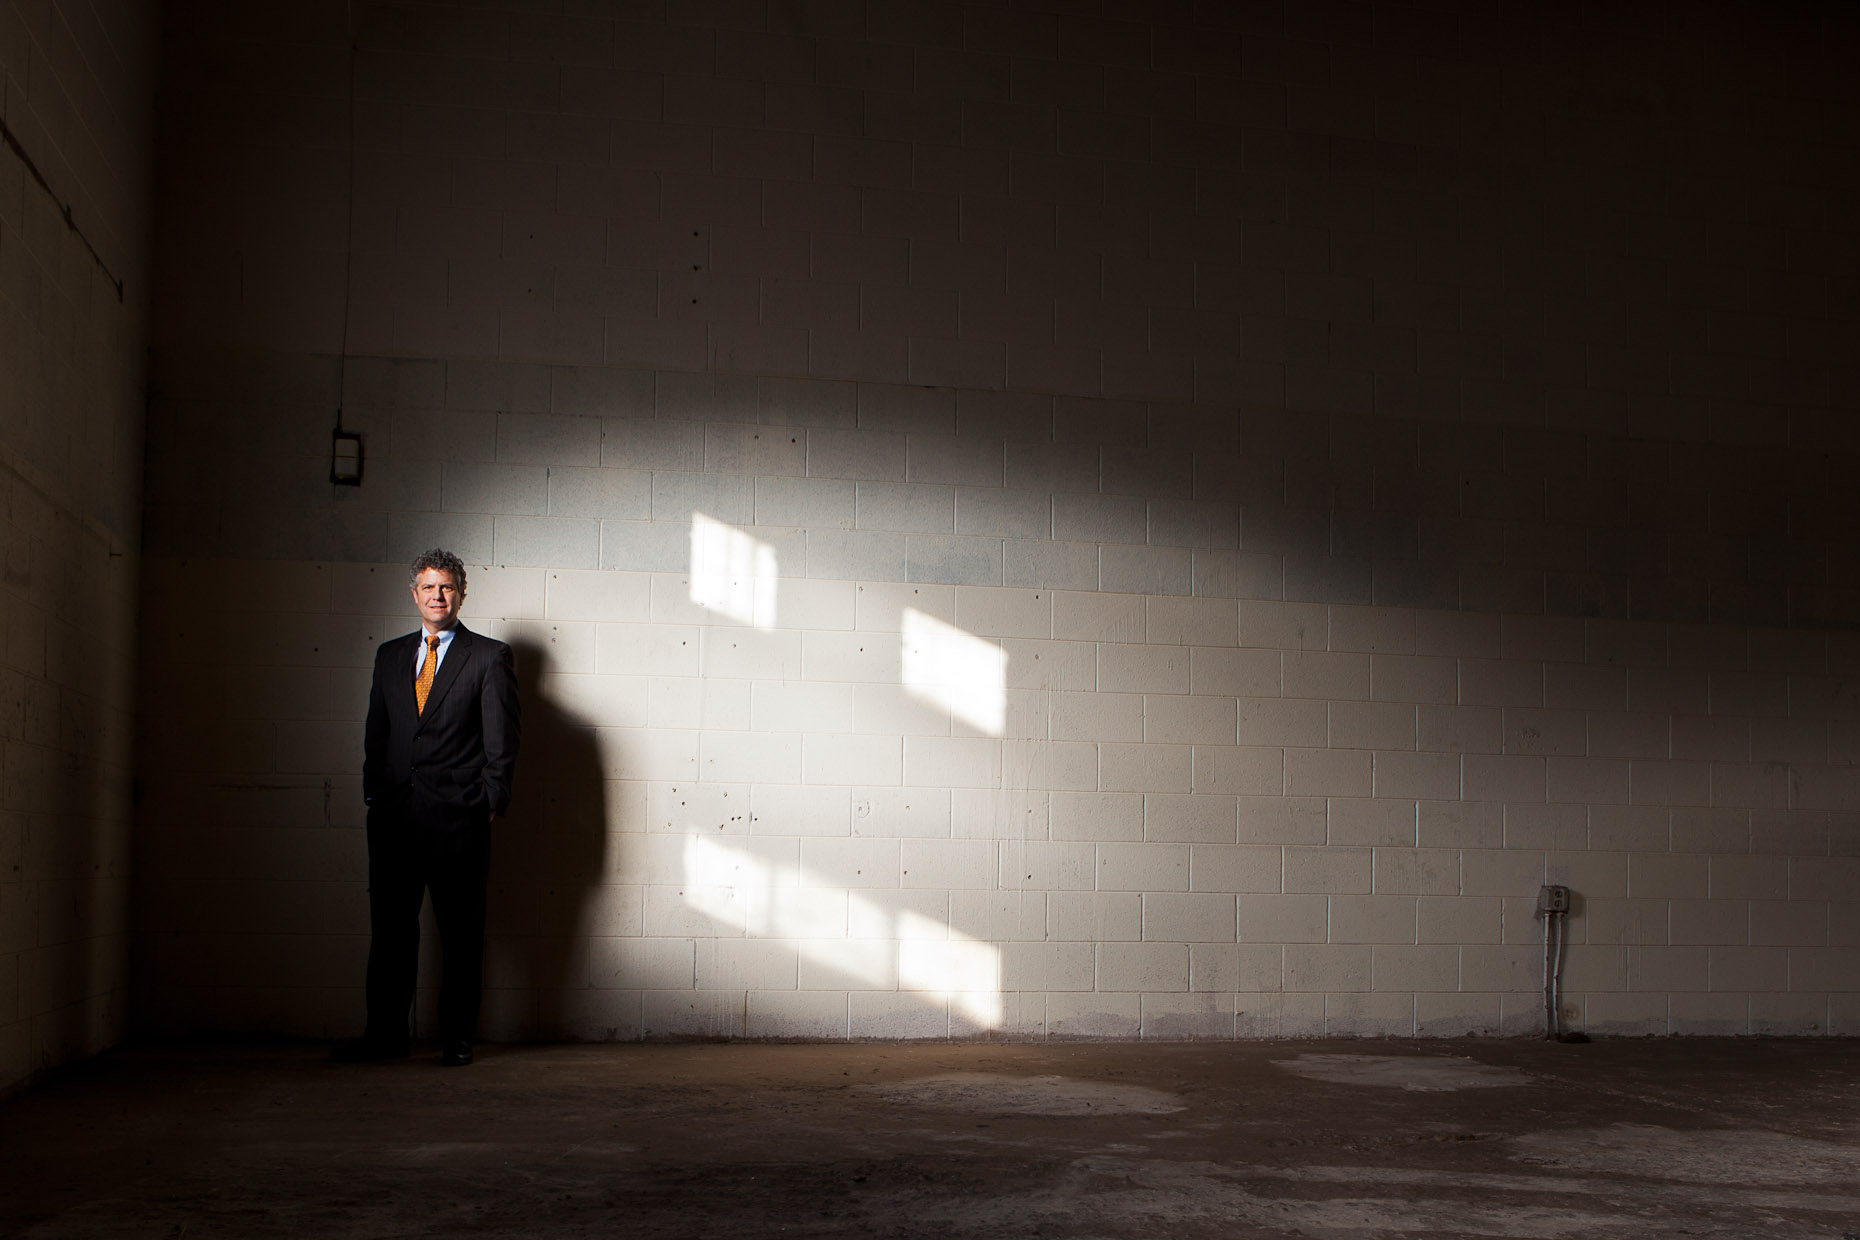 creative editorial photographer - a real estate broker photographed in an empty building